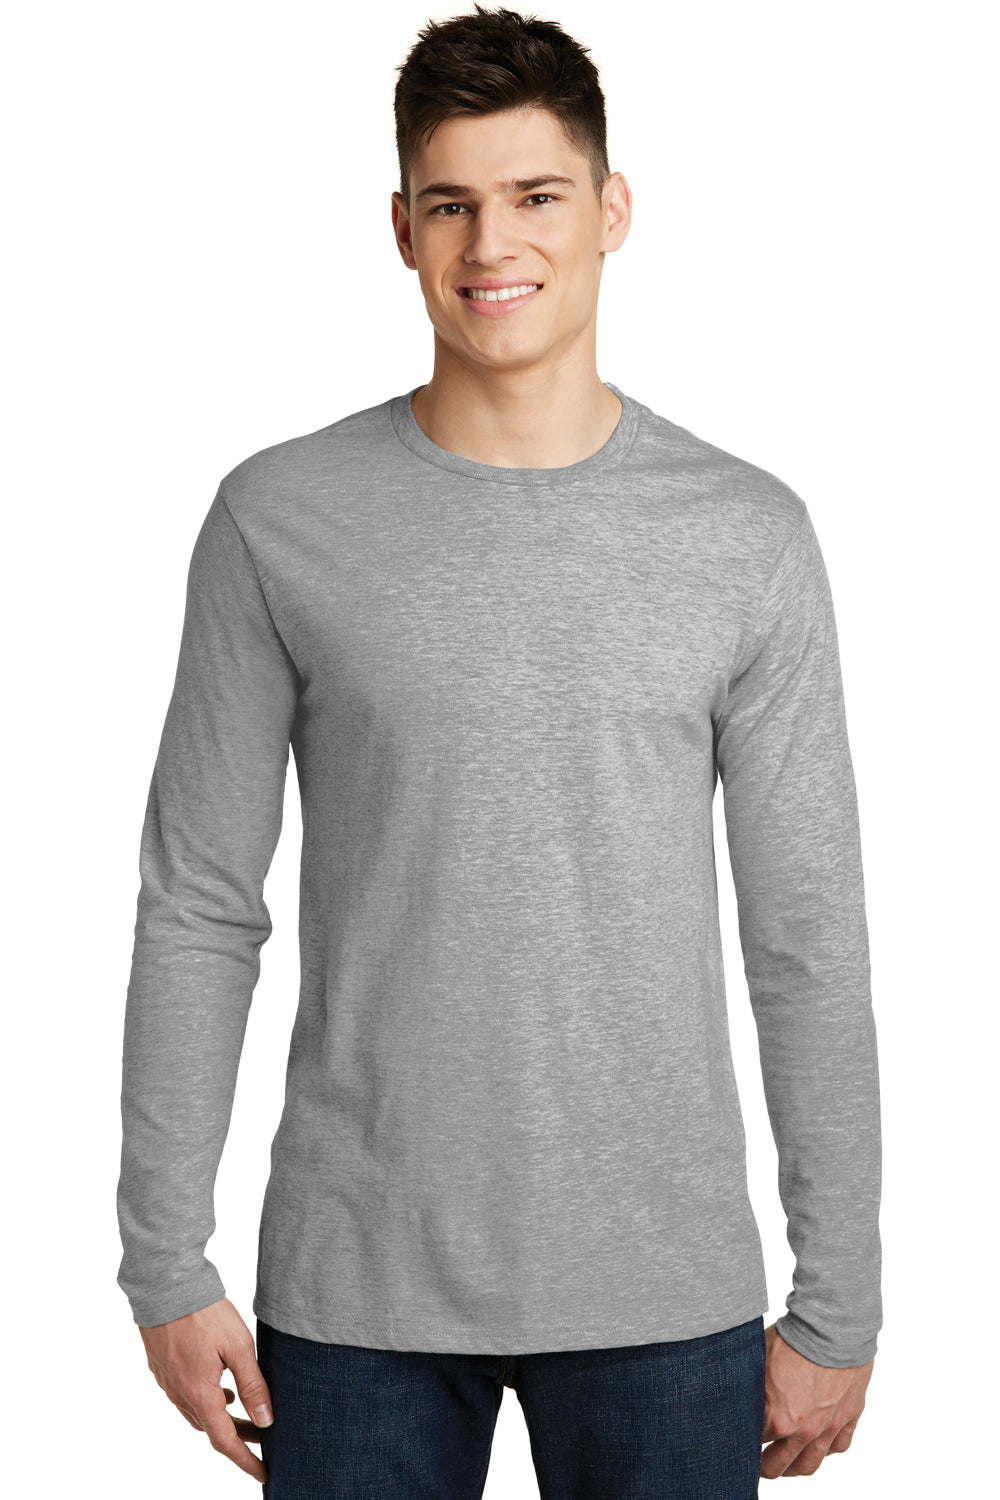 District DT6200 Mens Very Important Long Sleeve Crewneck T-Shirt Heather Light Grey Front